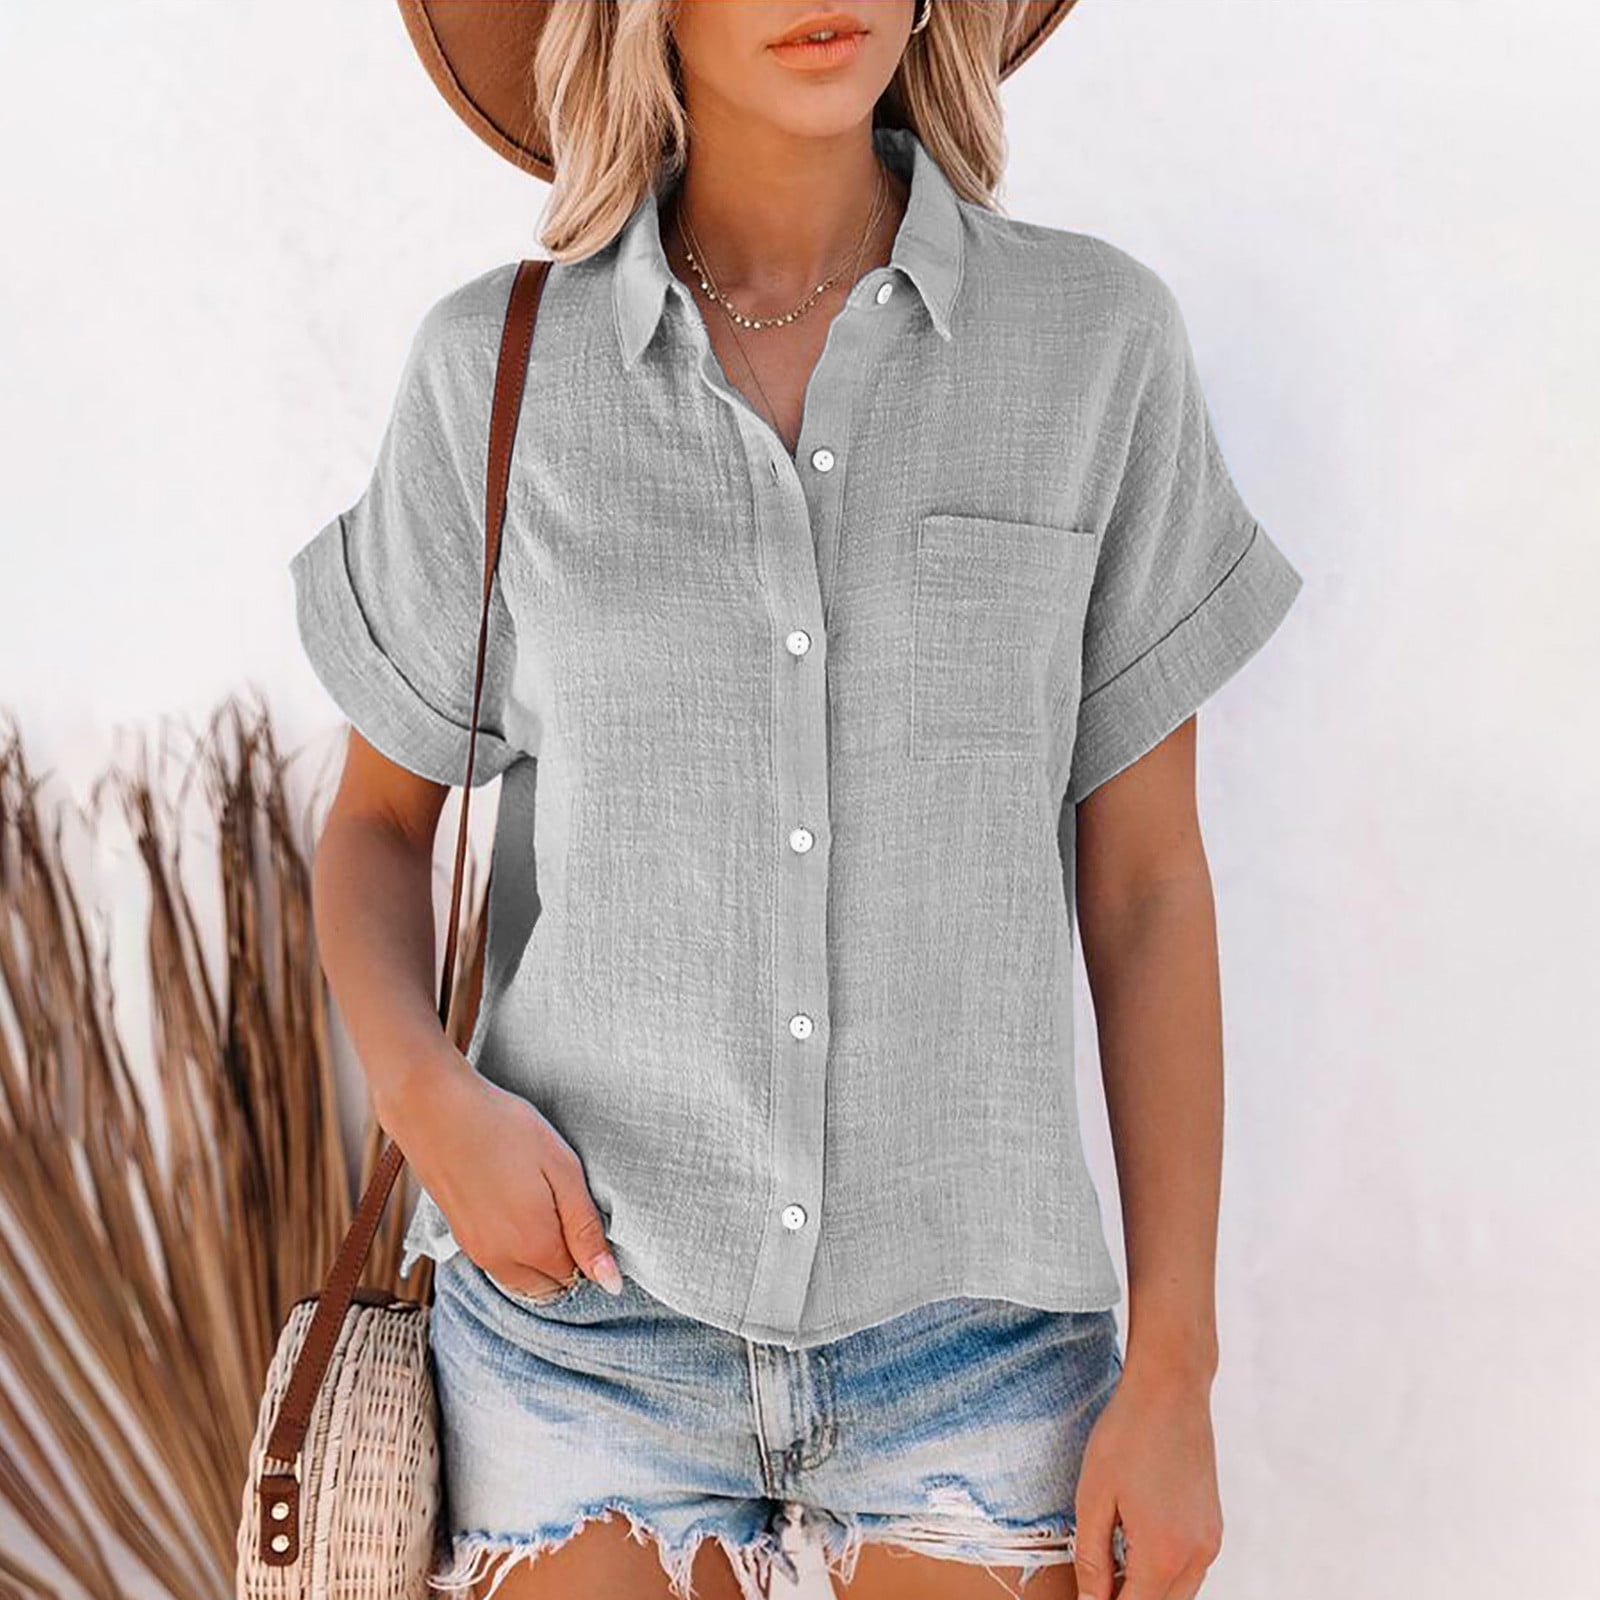 RKZSDR Linen Shirts for Women Casual Dressy Plus Size Summer Short Sleeve  Button Down Shirt Tops Trendy Plain Tees Oversized Loose Relaxed Fitted  Cotton Tshirt Blouse with Pockets Gray XL 